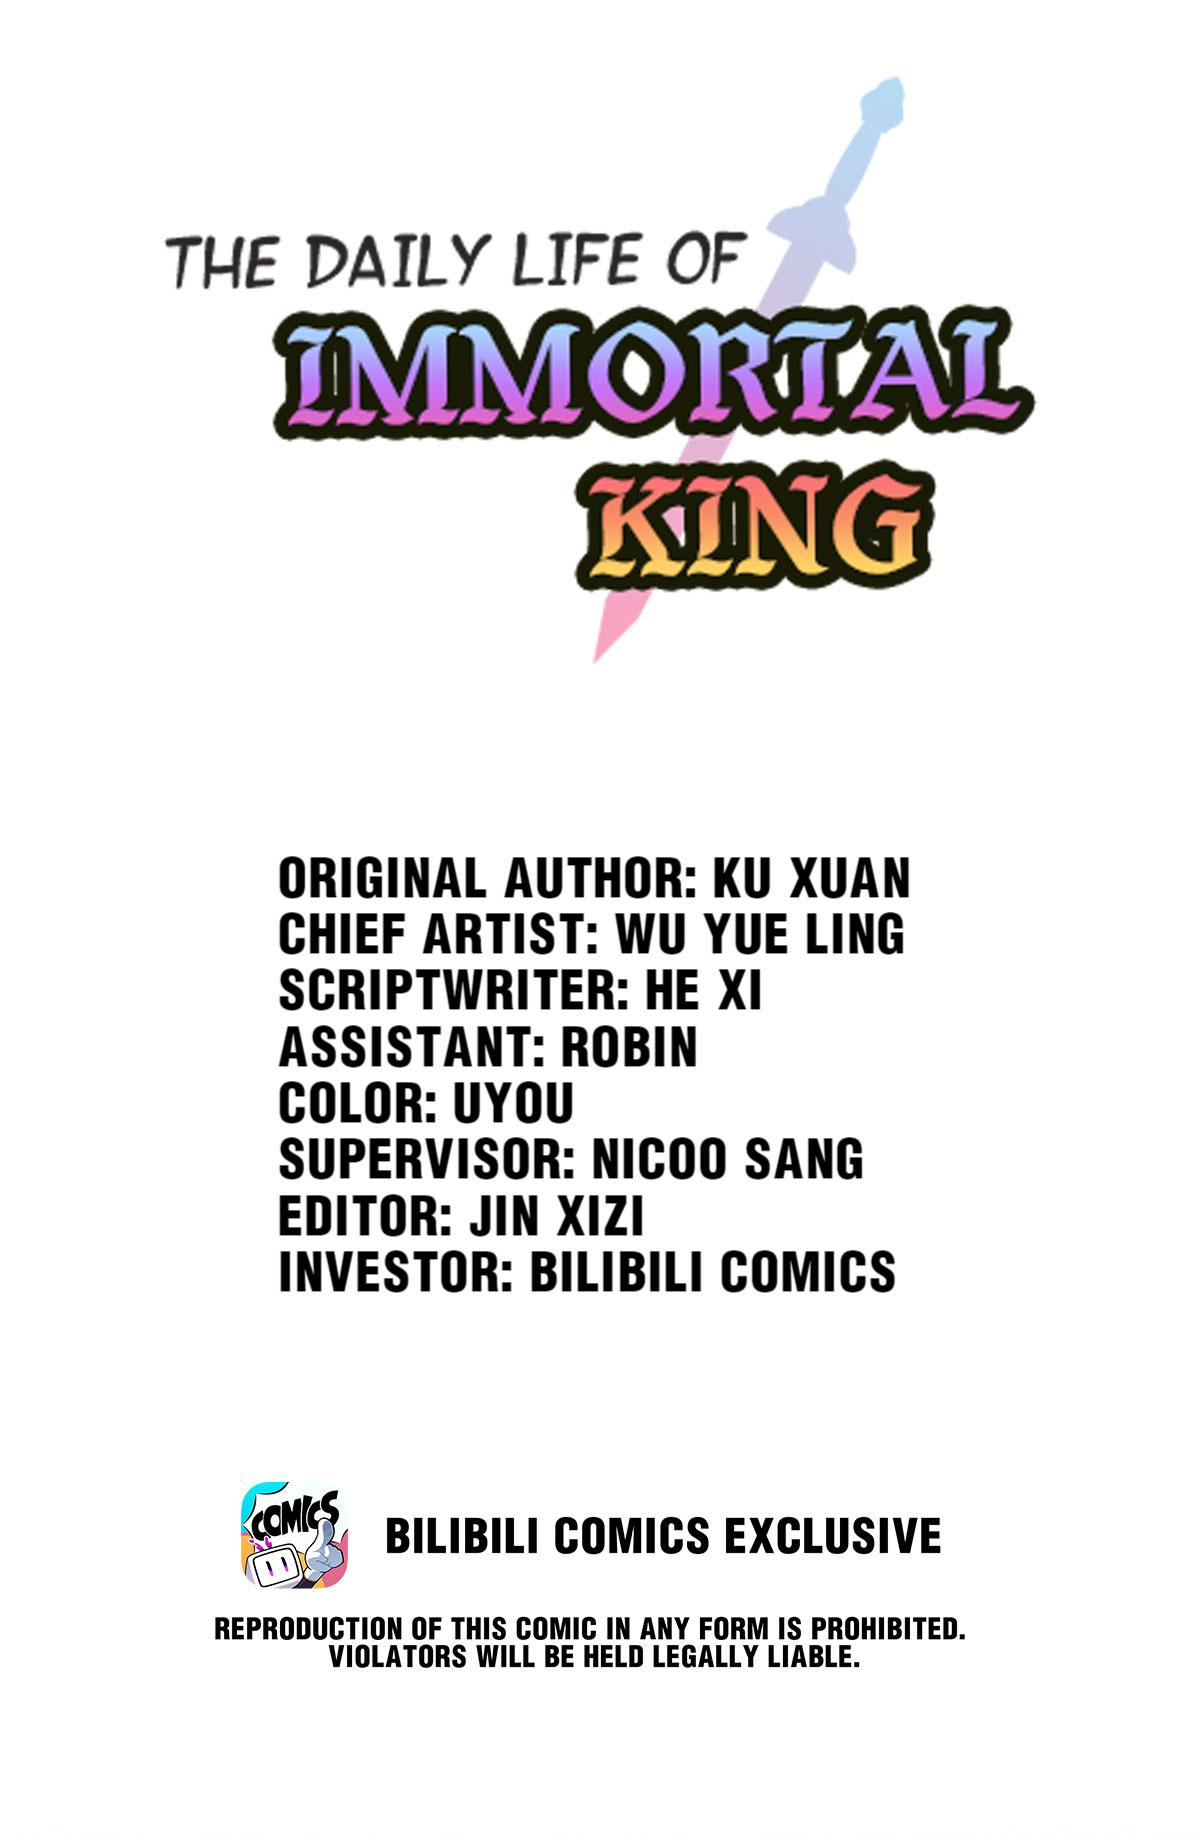 The Daily Life of Immortal King 34 Impeccable!